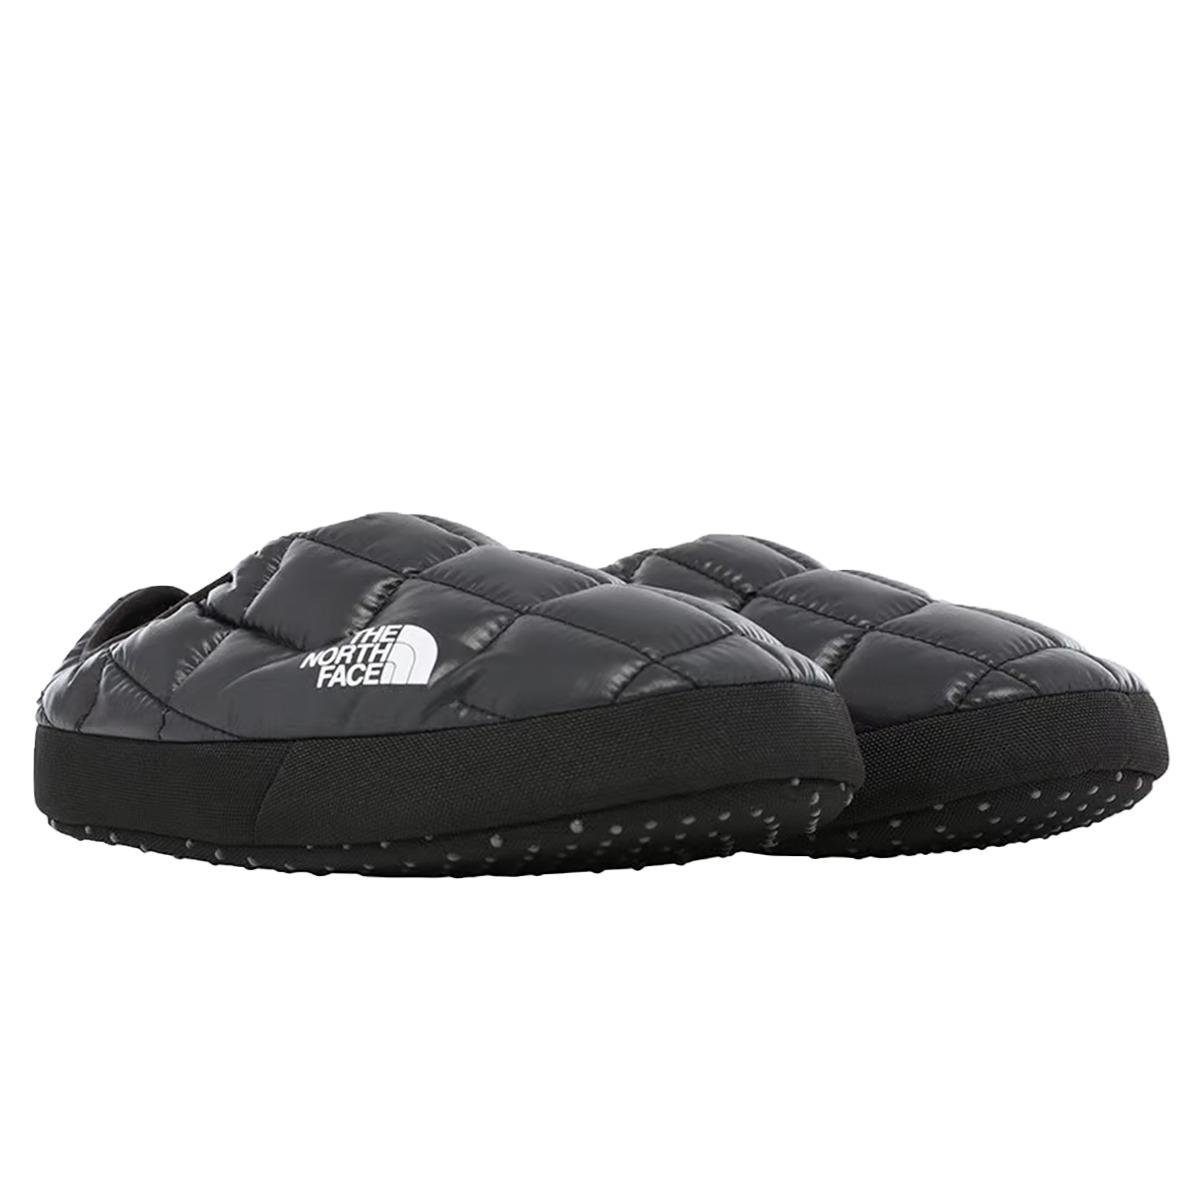 Pantofole Donna Nse Tent Mule III THE NORTH FACE